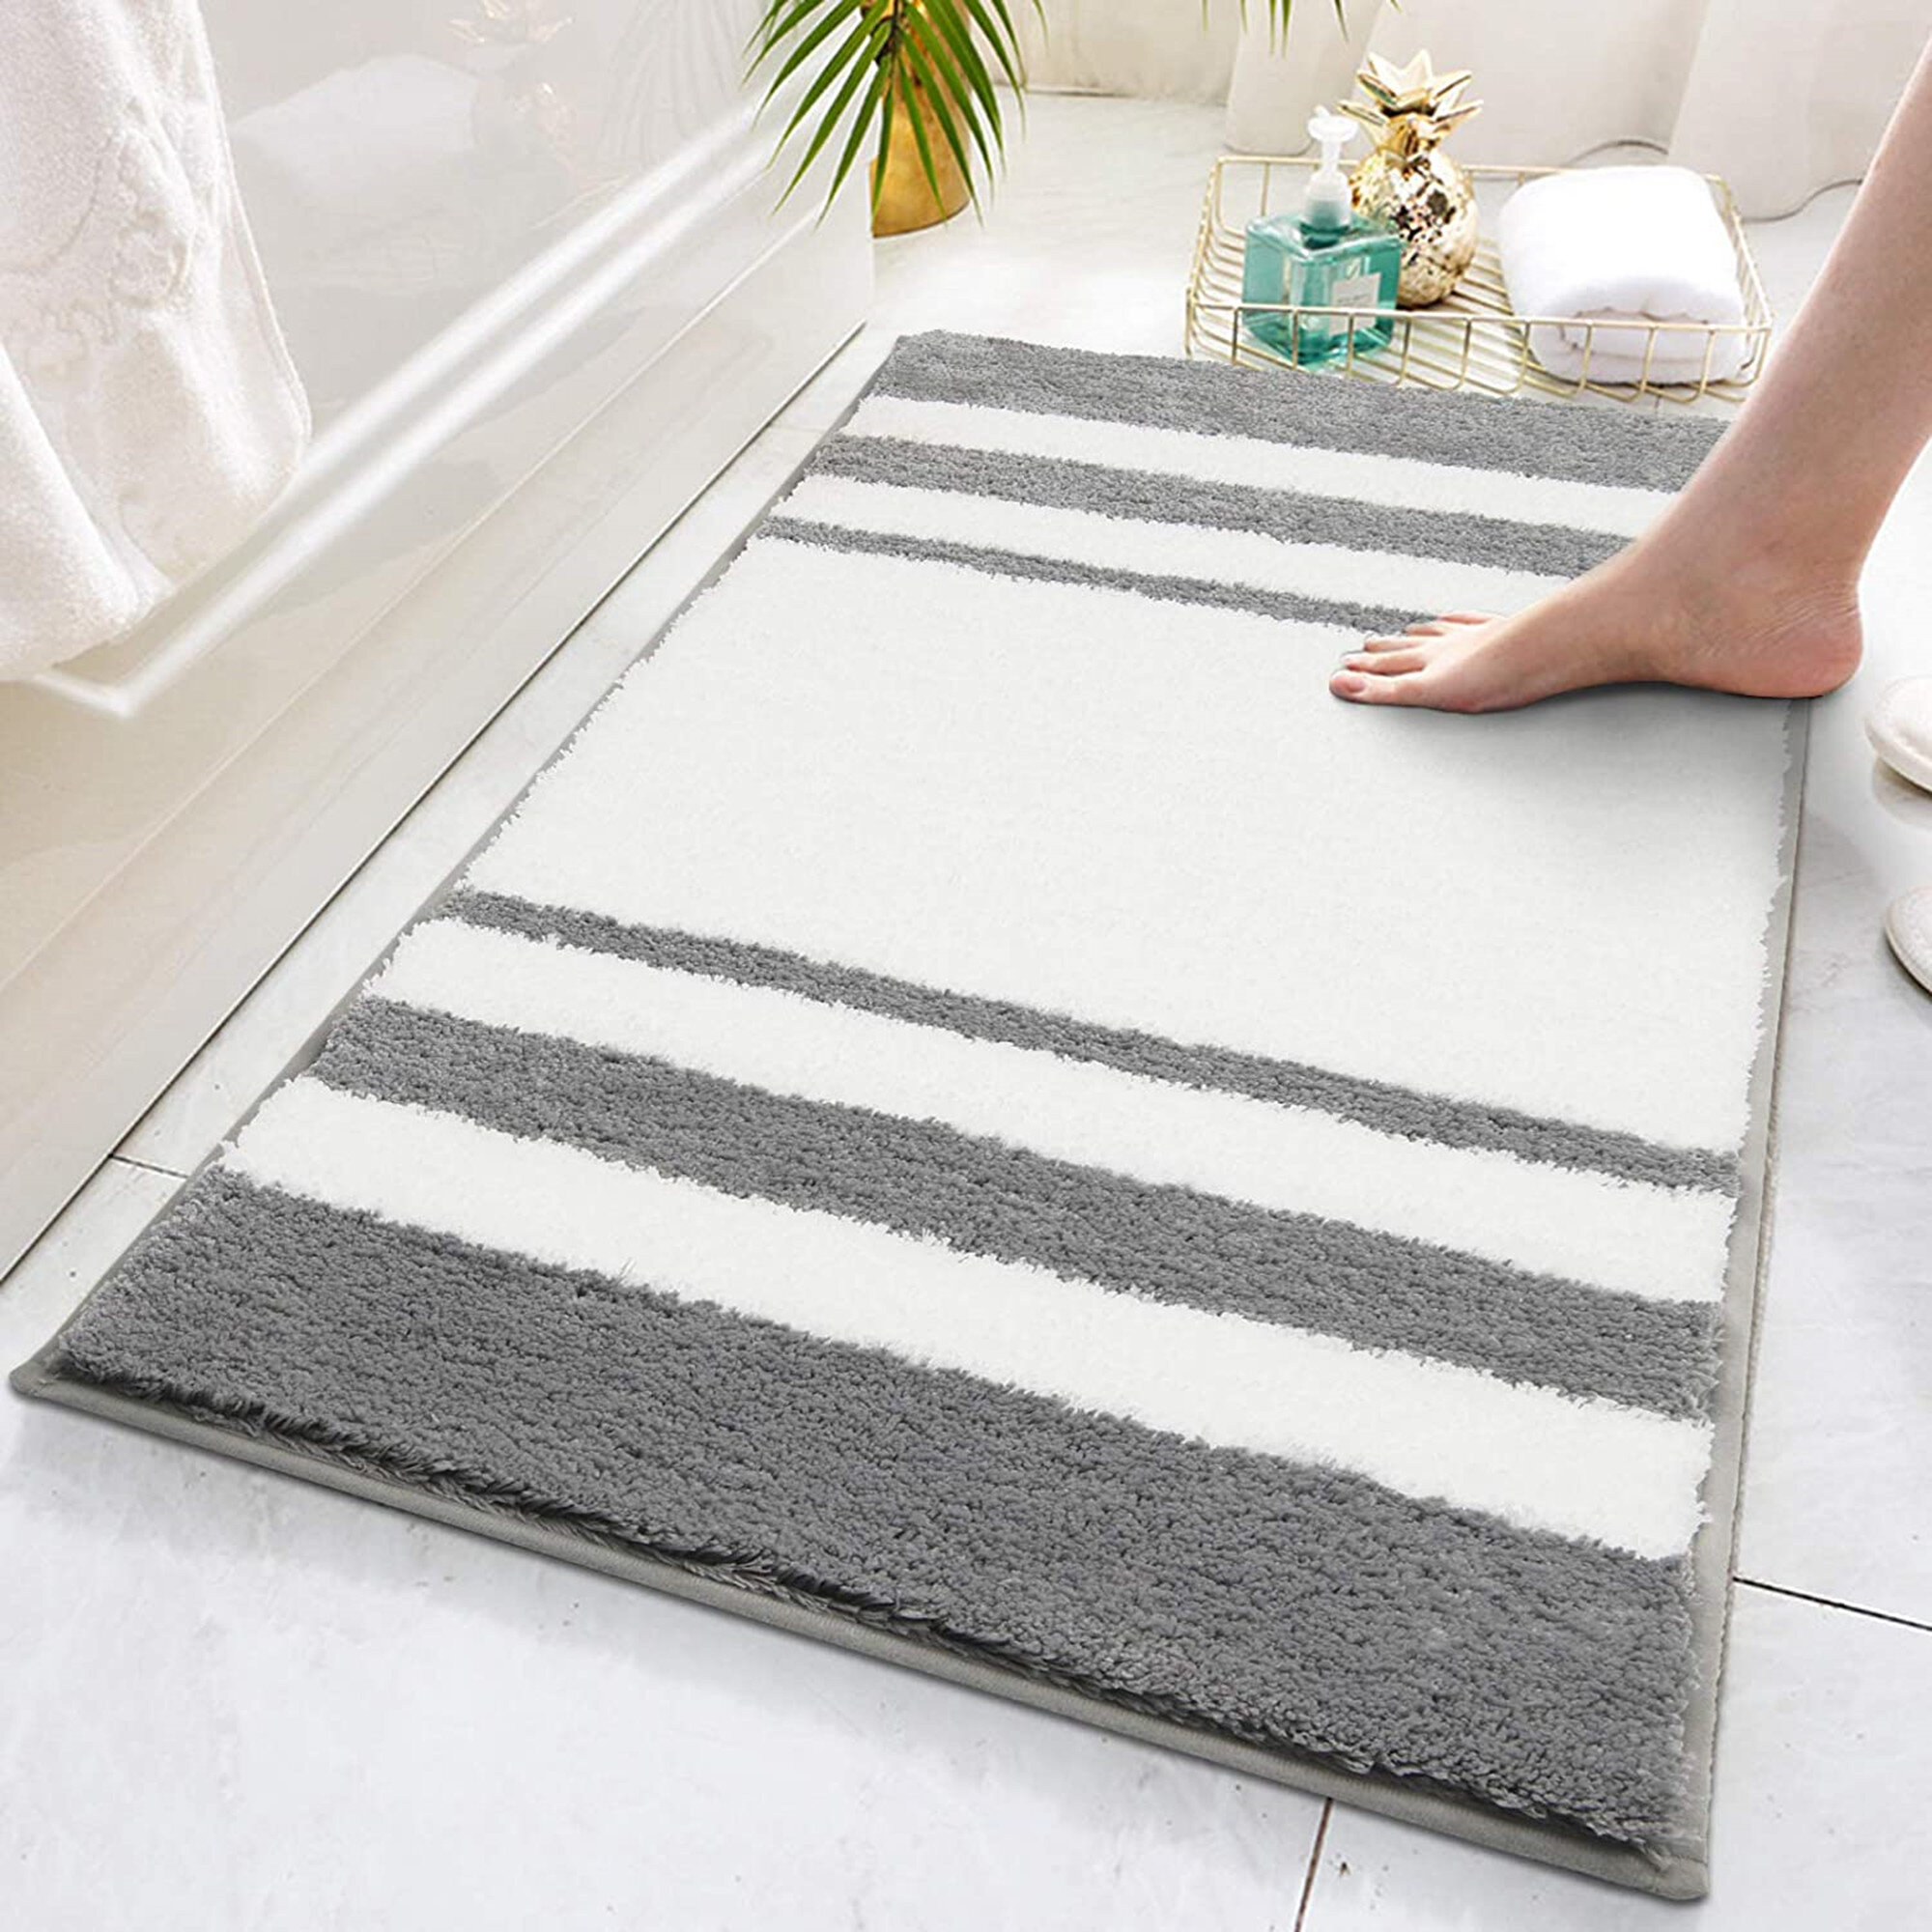 Extra Soft and Absorbent Bath Rugs Bathroom Rug Mat 32x20 